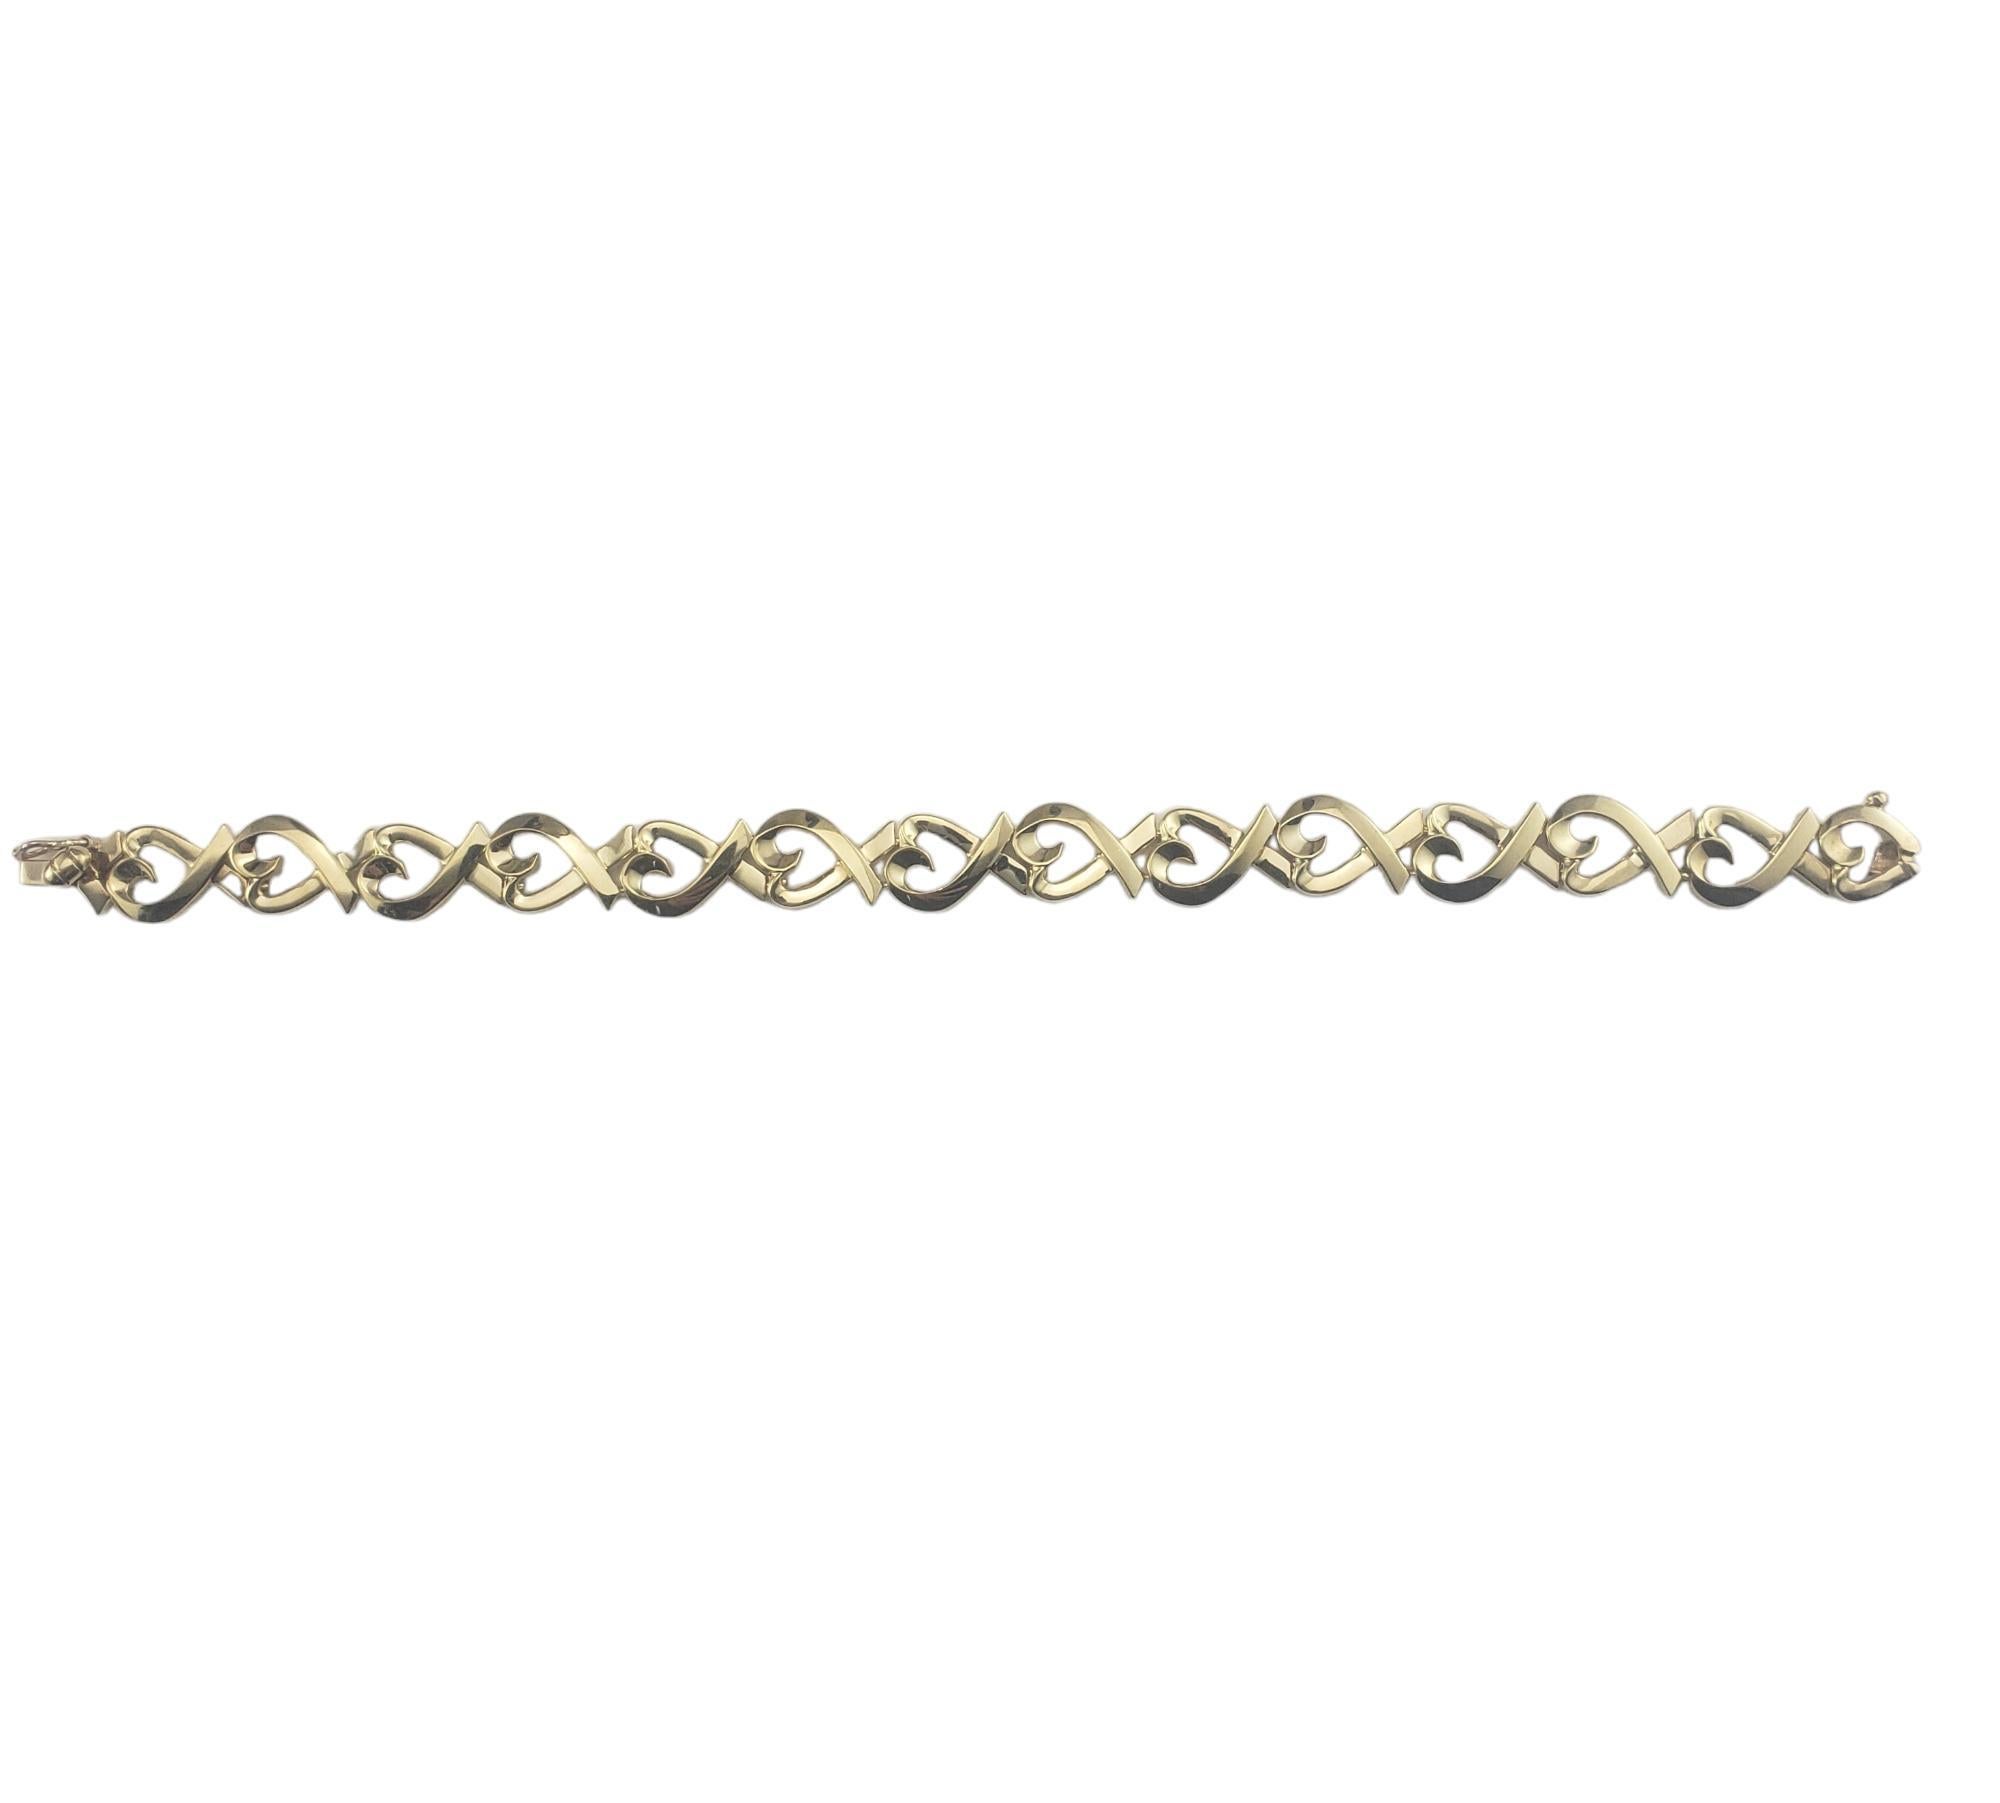 Tiffany & Co. Paloma Picasso 18 Karat Yellow Gold Loving Hearts Bracelet-

This stunning Loving Hearts link bracelet is crafted in beautifully detailed 18K yellow gold by Paloma Picasso for Tiffany & Co.  

Width: 10 mm.

Size: 6.75